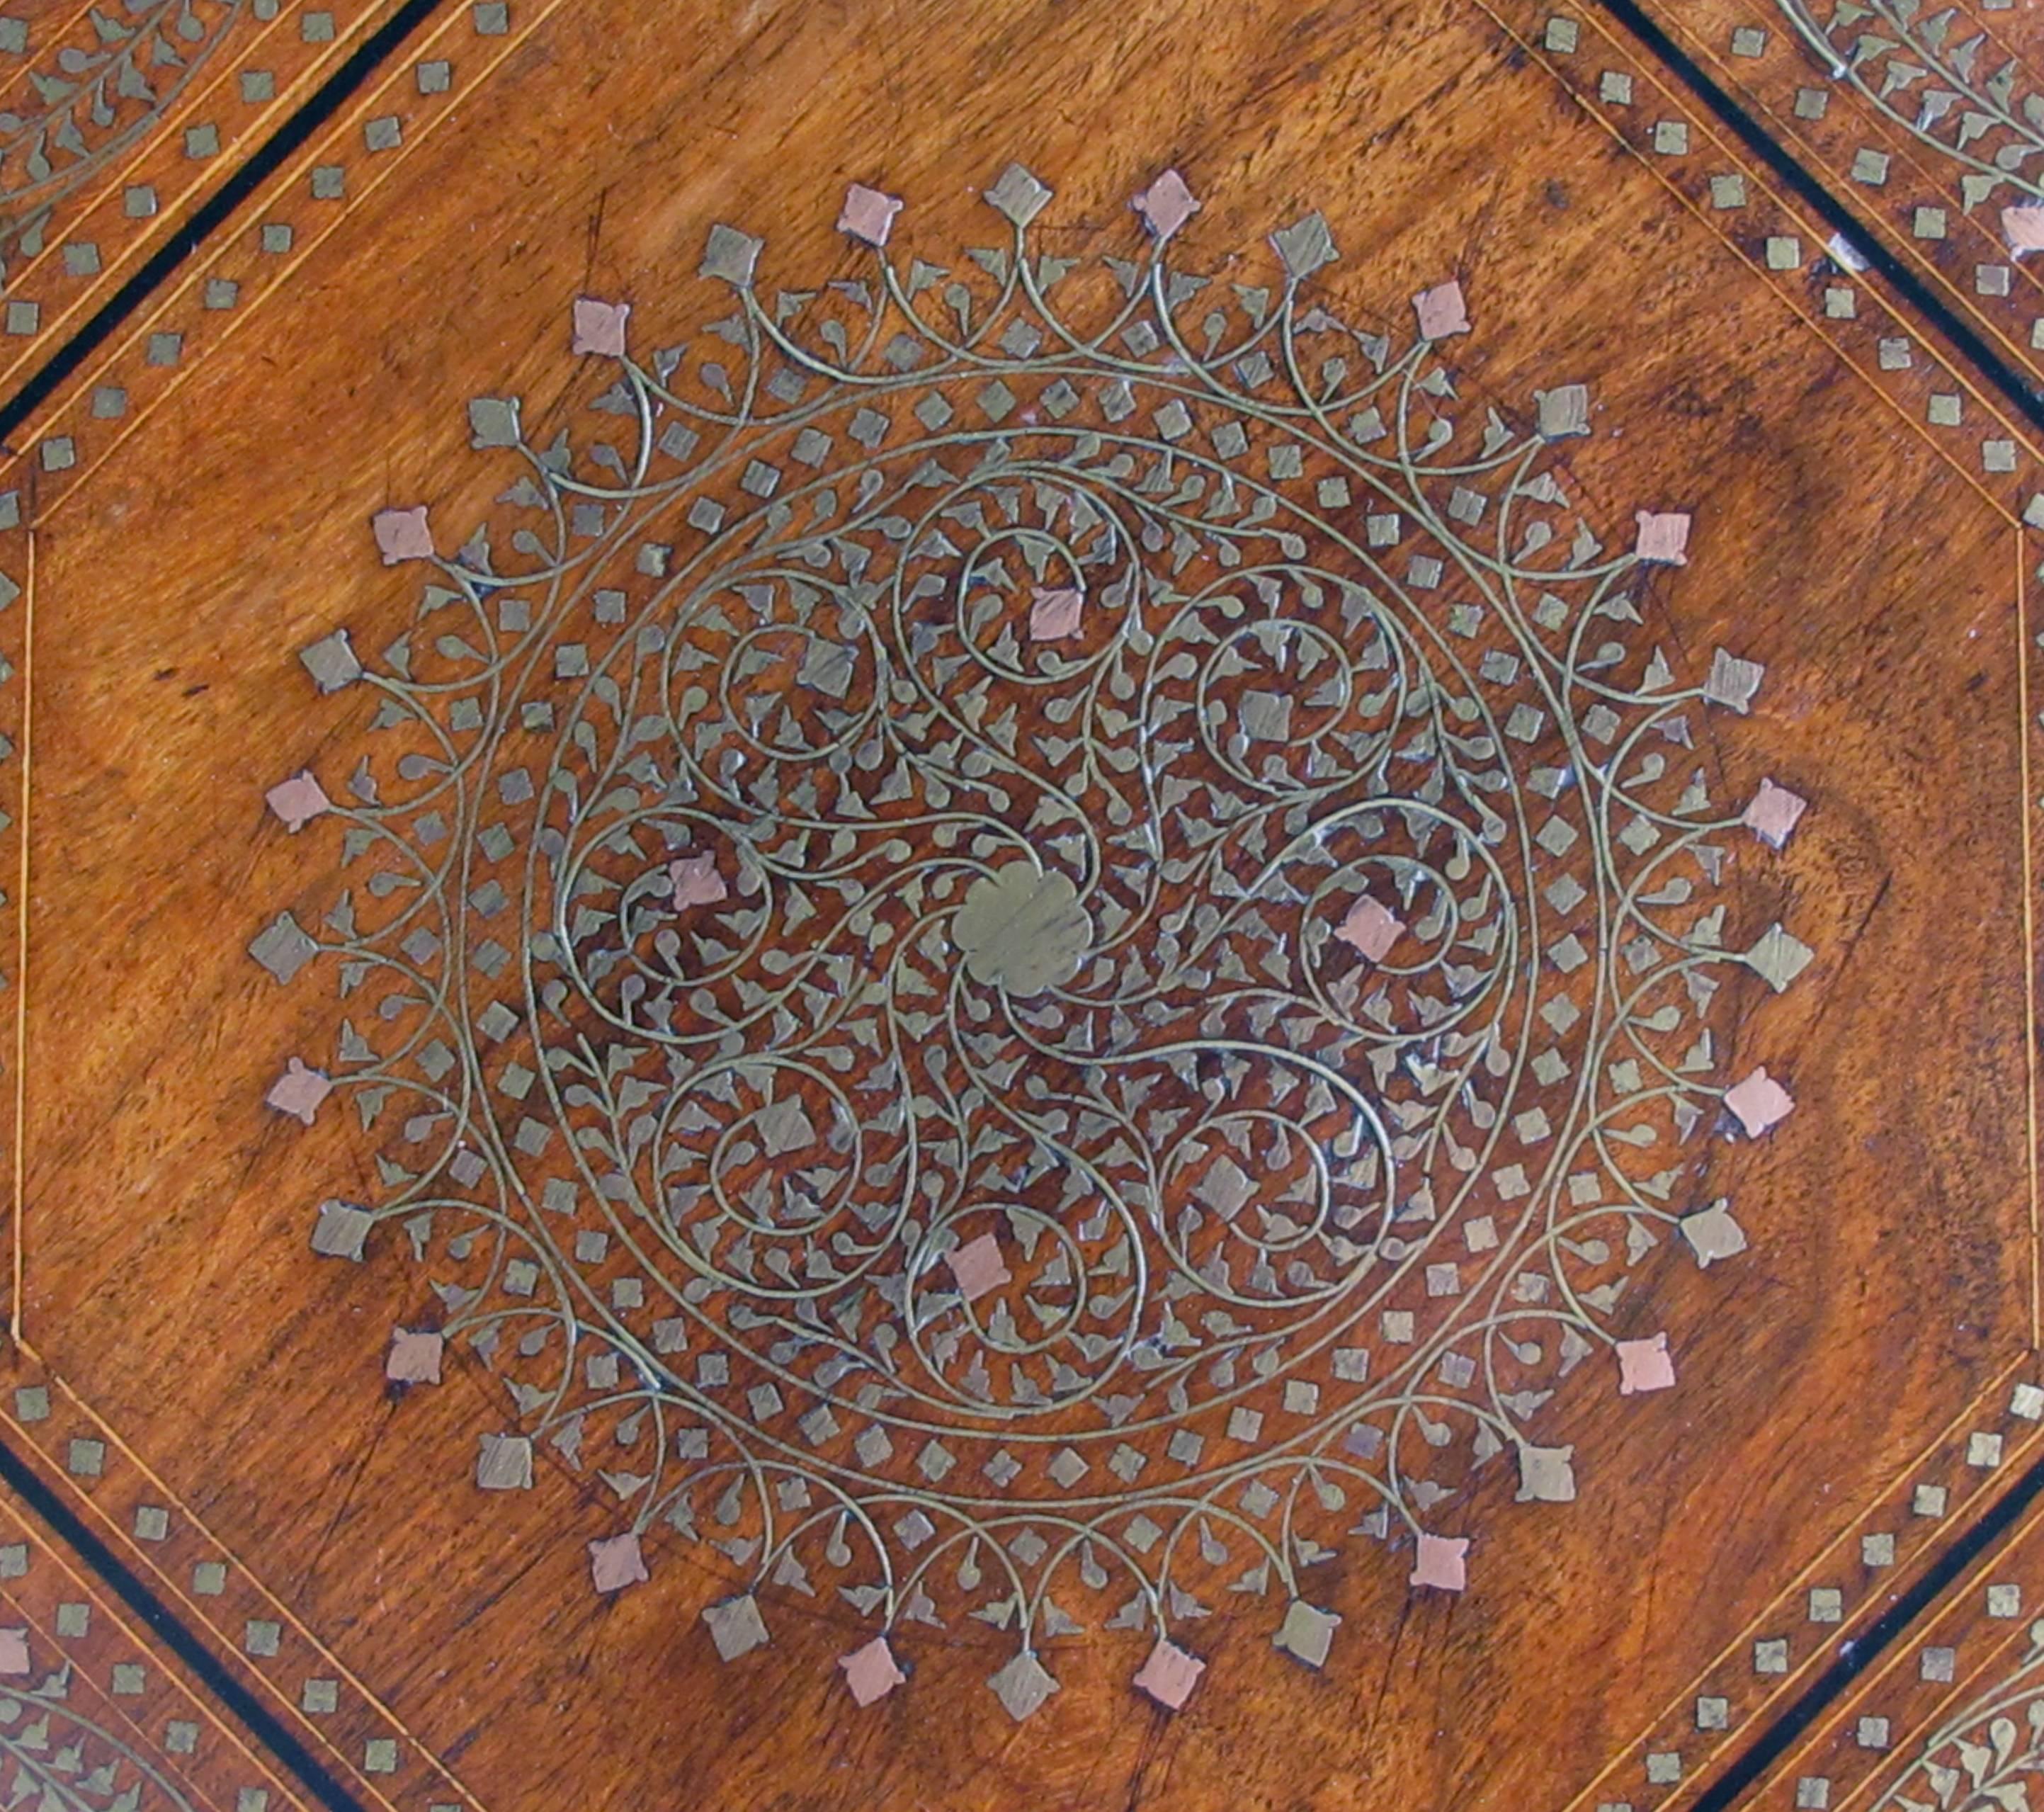 A very versatile and useful side table with octagonal top centering an interlacing copper and brass inlaid medallion surrounded by a meandering foliate branch; all raised on an arabesque base with additional brass adornment; the top affixed to the